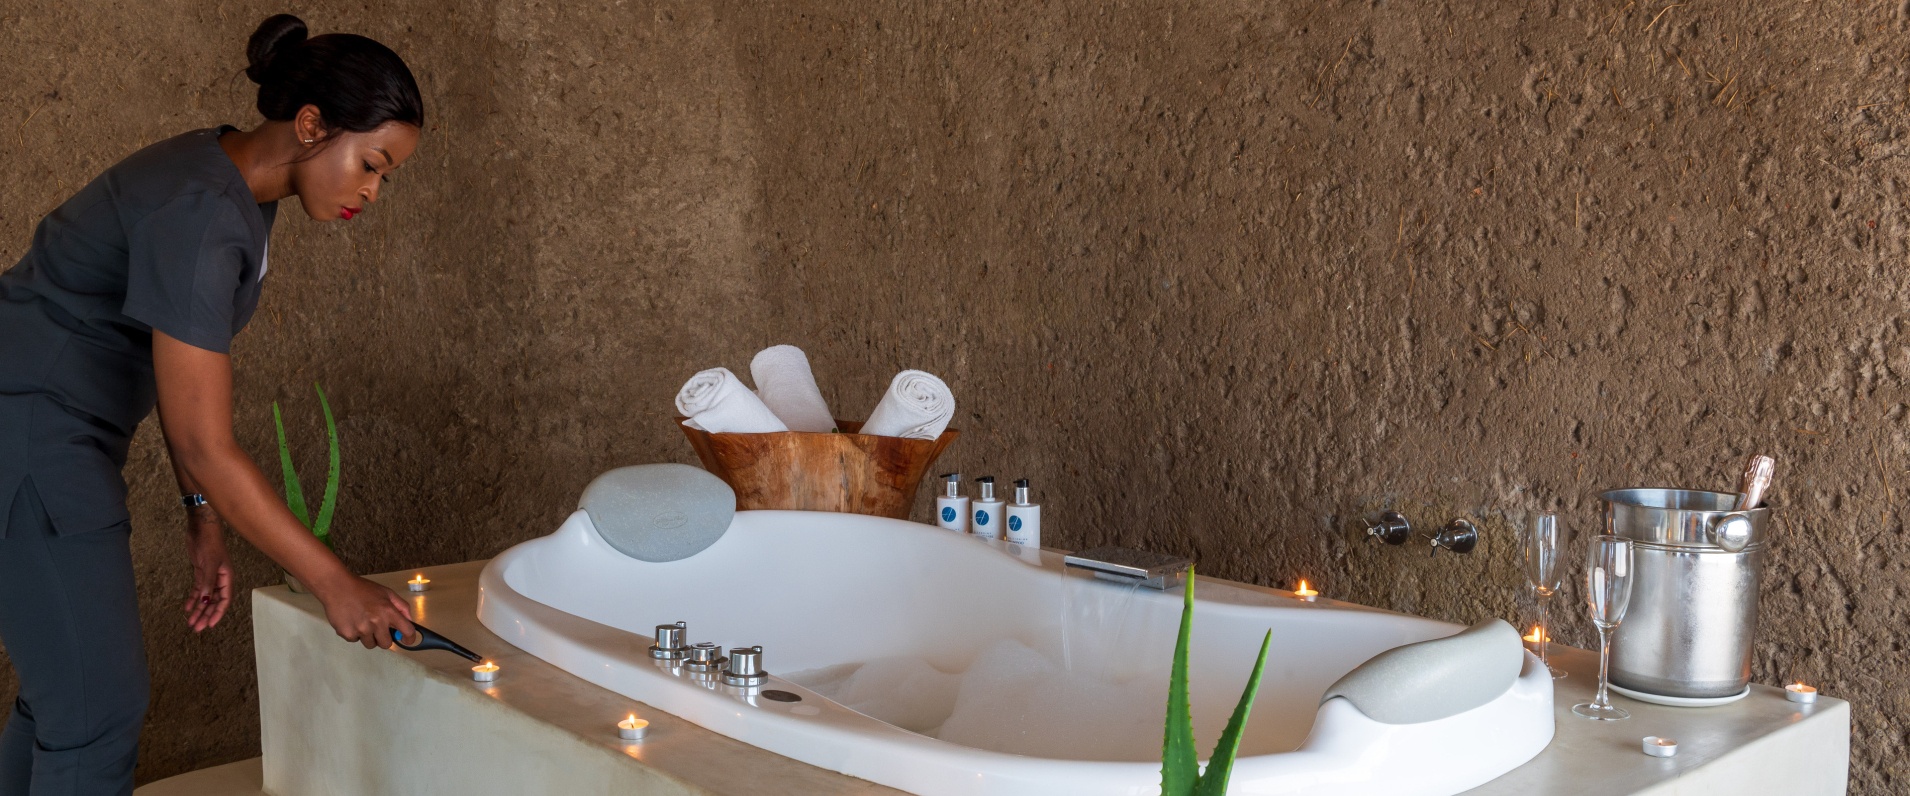 Experience luxury at Earth Lodge's Amani Spa, with indulgent baths combining opulence and tranquillity.